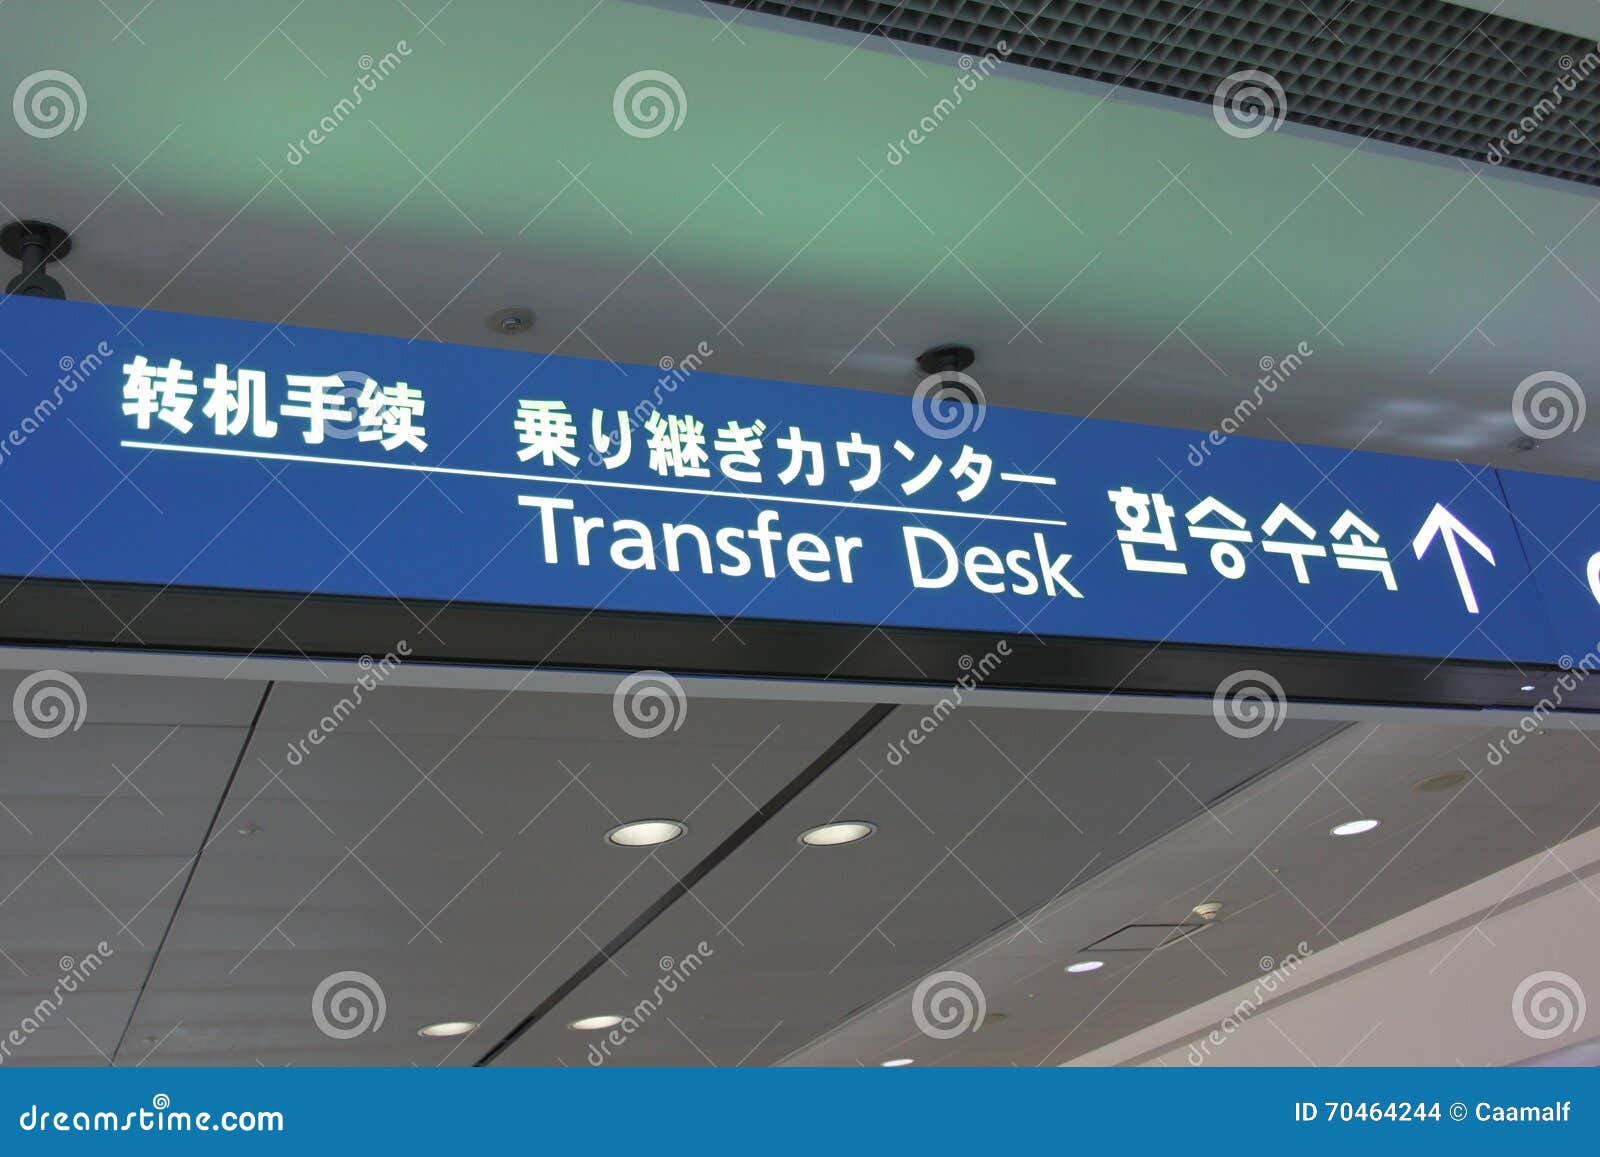 Sign For Transfer Desk In Chinese Japanese Korean And English